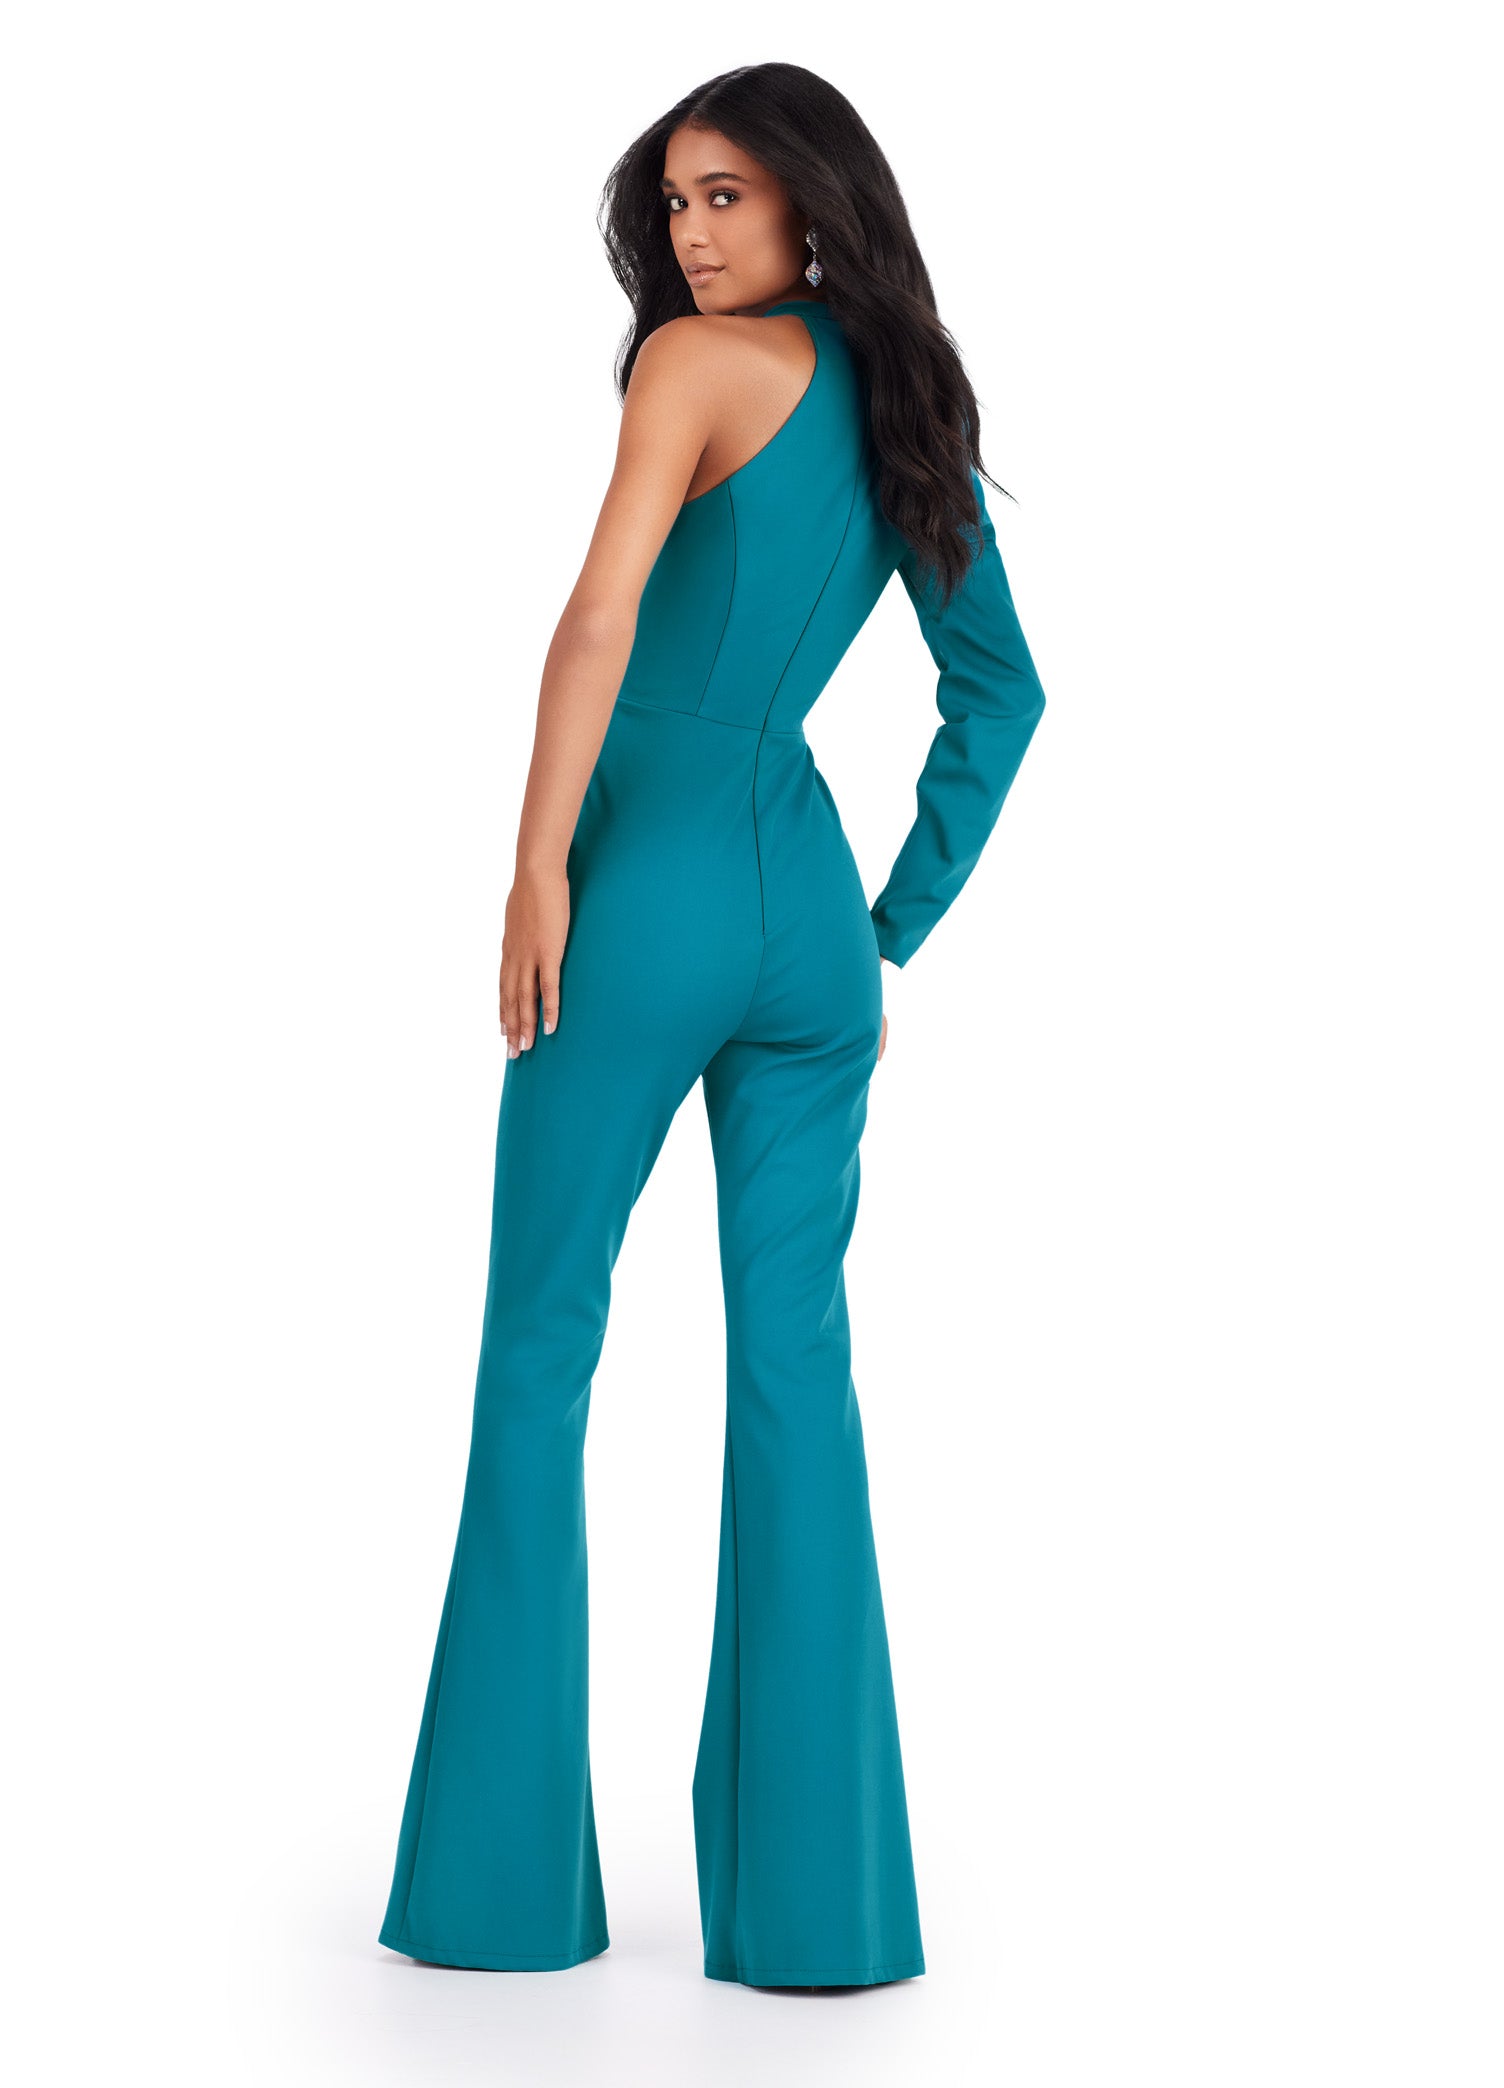 Effortlessly elegant, the Ashley Lauren 11531 Prom One Shoulder Jumpsuit exudes sophistication with its scuba material and one-shoulder design. The added puff sleeve detail adds a touch of drama to this formal piece. Embrace a modern and stylish look with this jumpsuit for any special occasion. Be remembered in this scuba one shoulder jumpsuit with exaggerated puff sleeve.